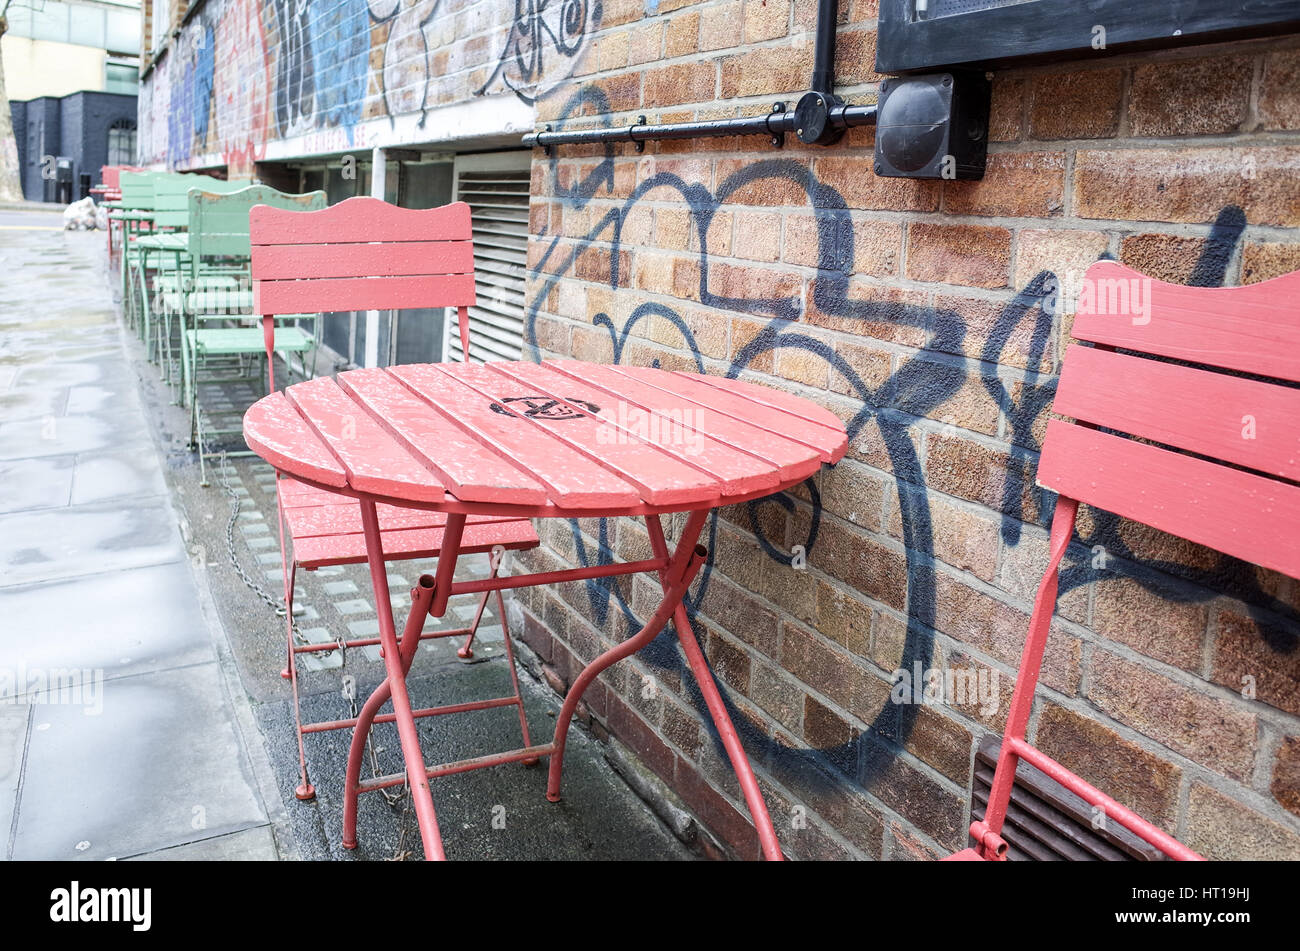 Cafe chairs outside the Electric Cinema / Barber and Parlour building in London's fashionable Shoreditch area Stock Photo